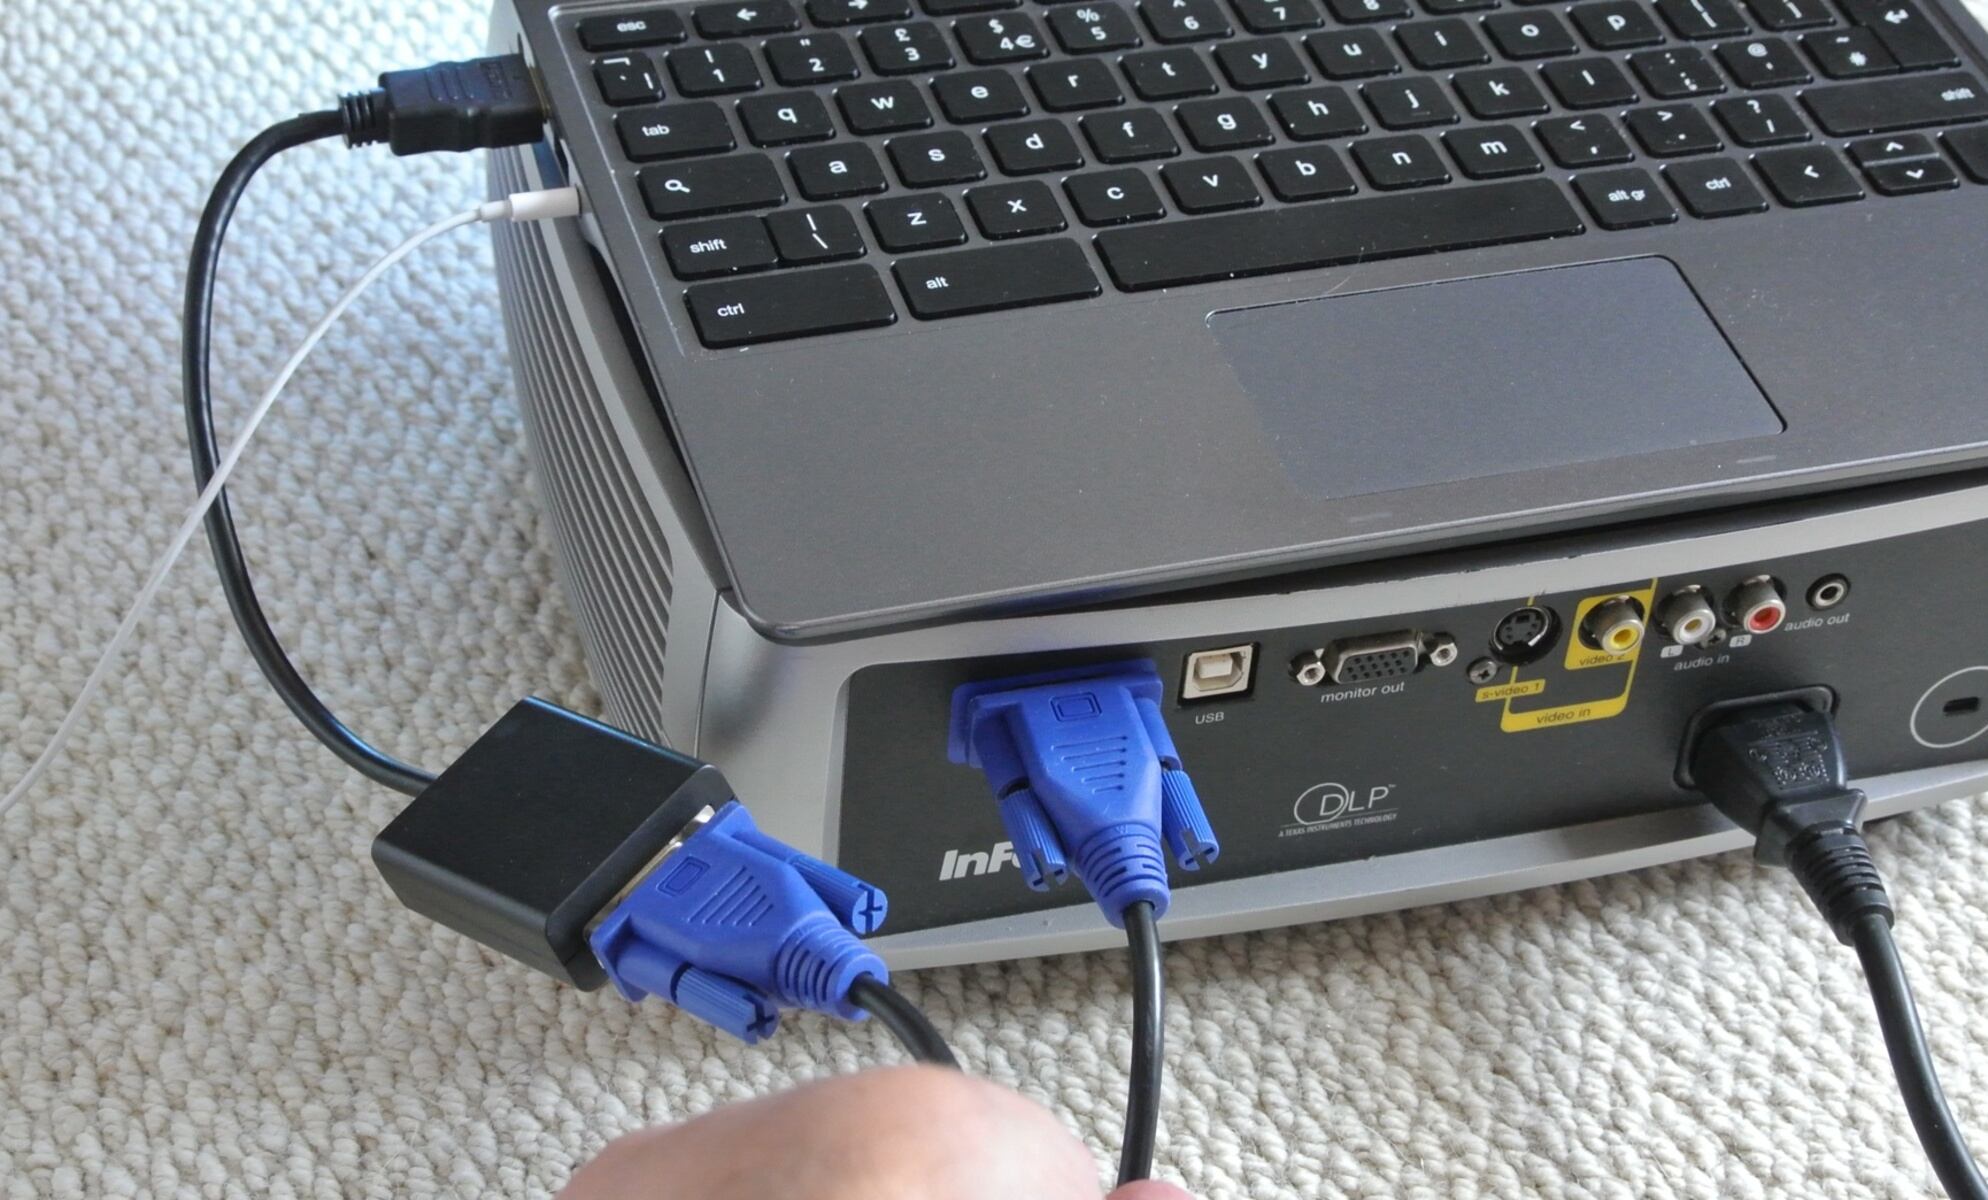 How To Connect A Laptop To A Projector